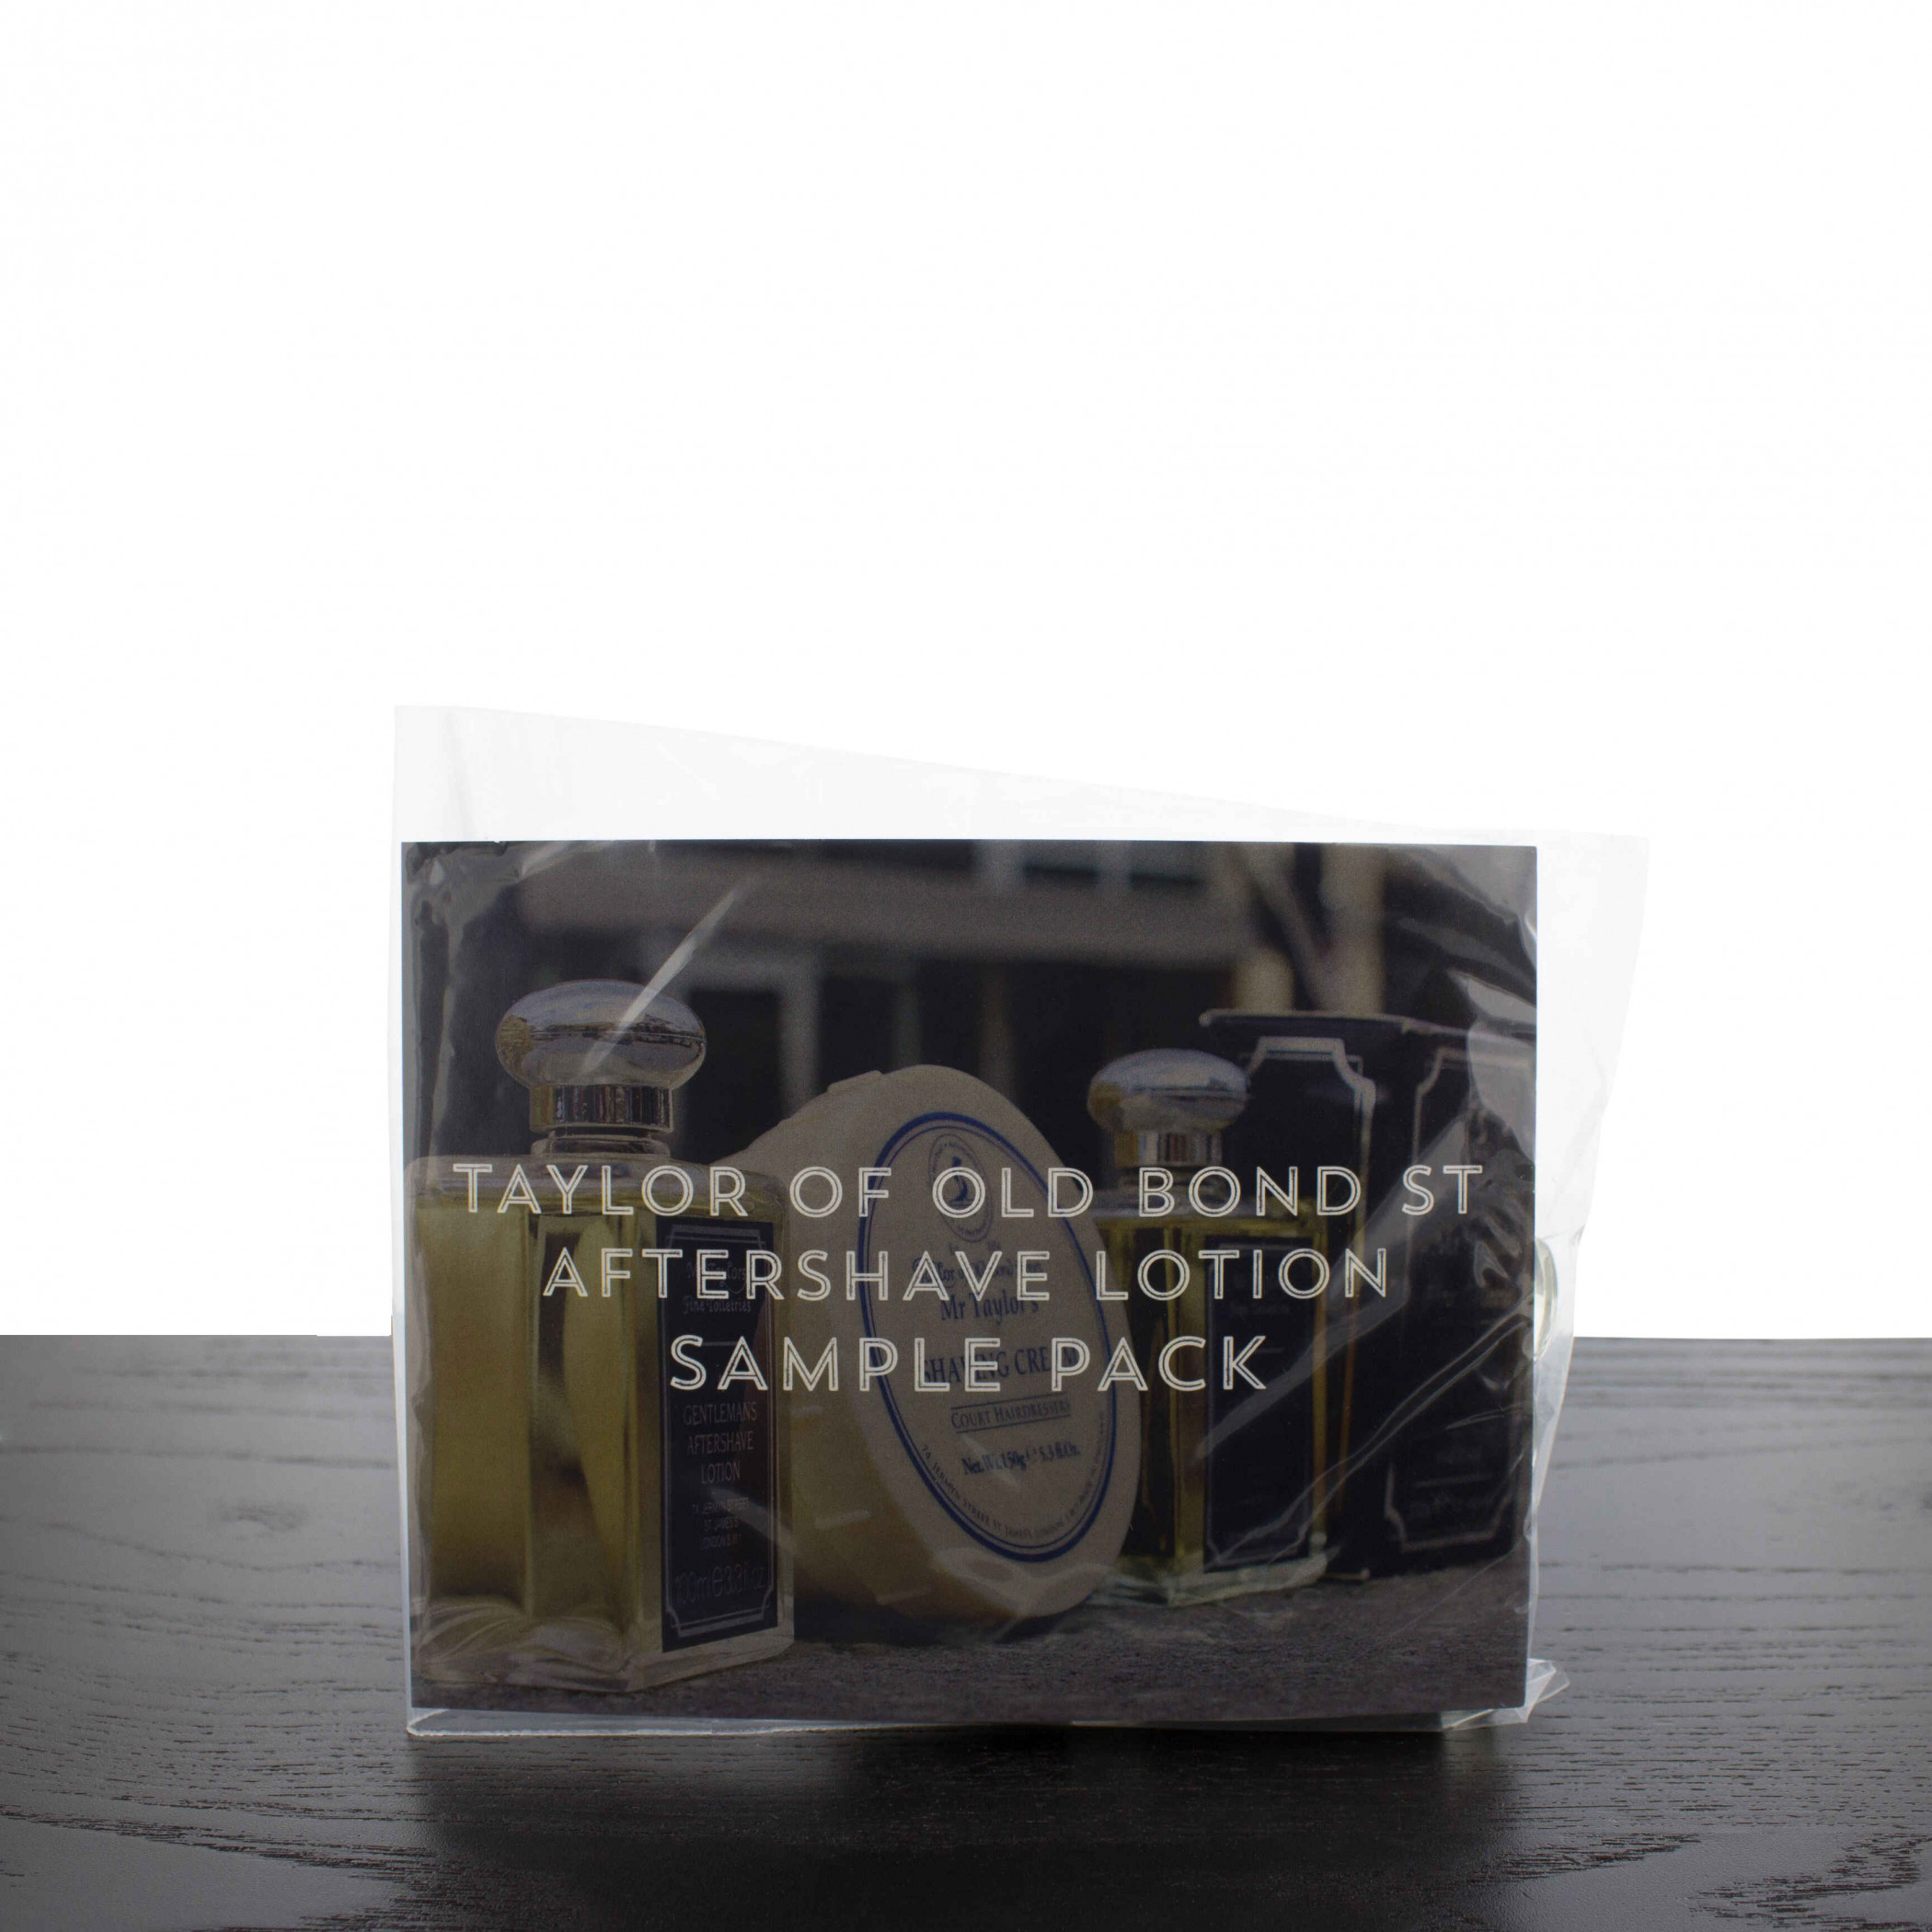 Taylor of Old Bond St Aftershave Lotions Sample Pack